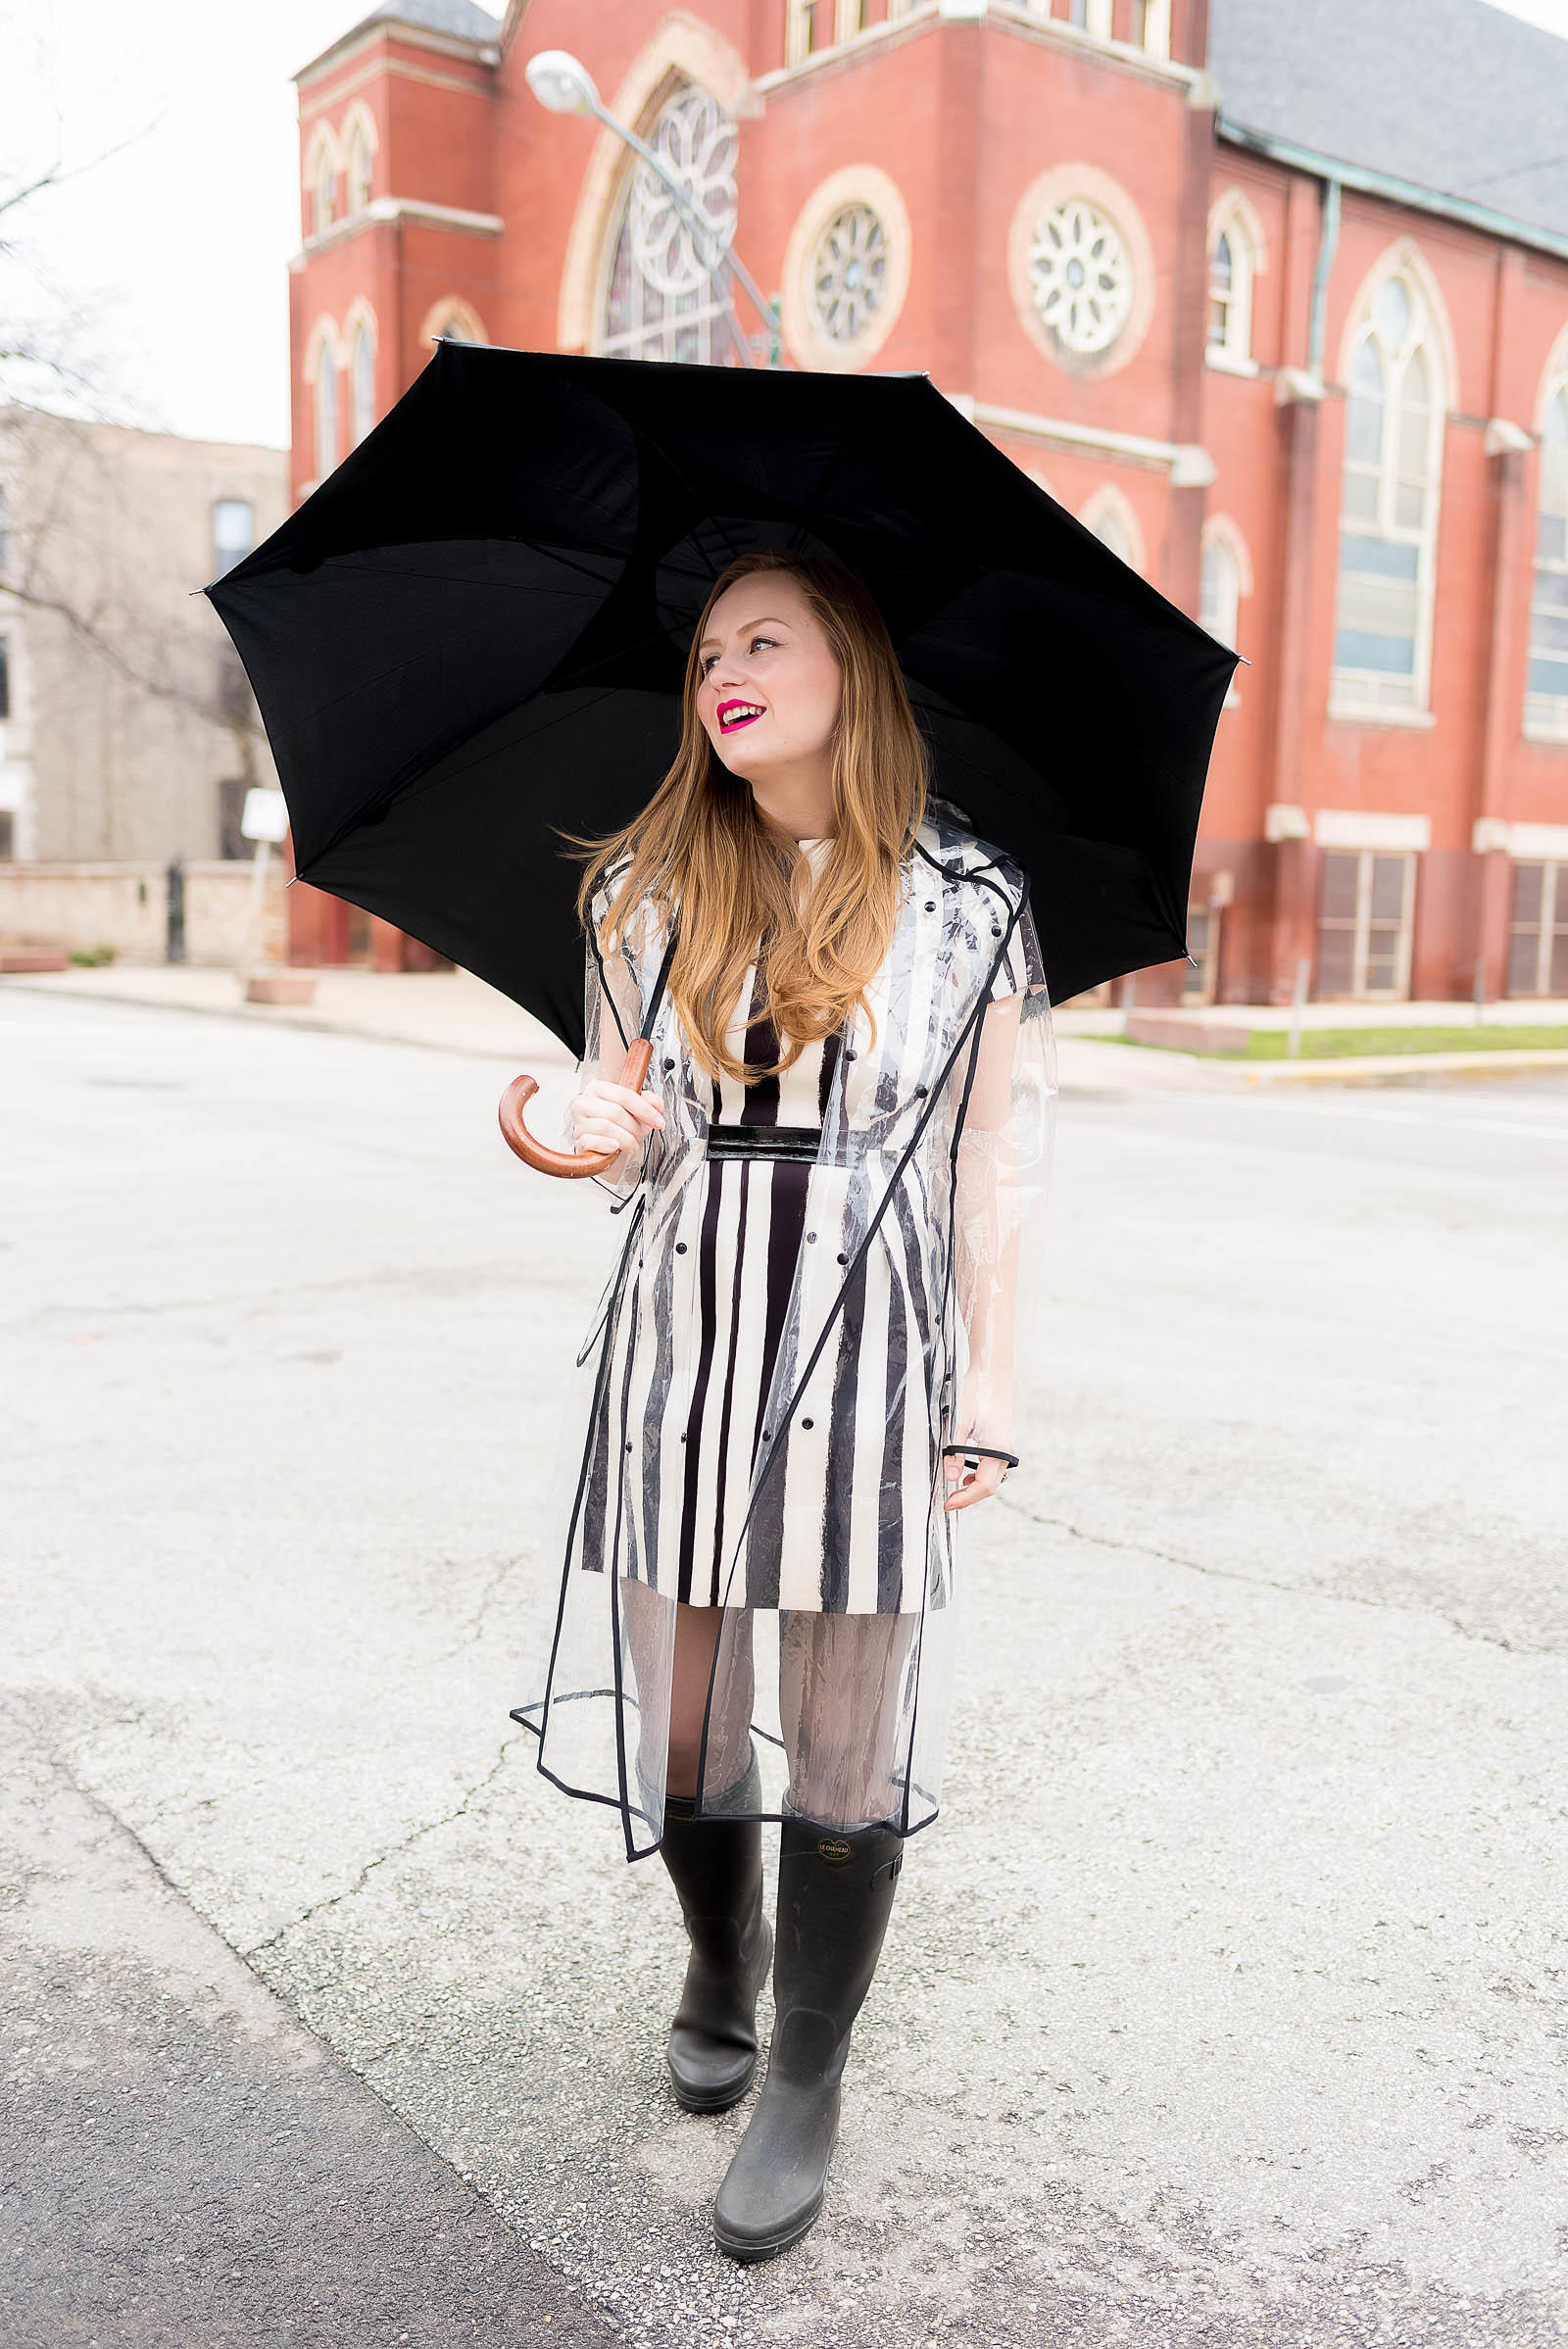 Striped Rainy Day Outfit Inspiration with Wellies